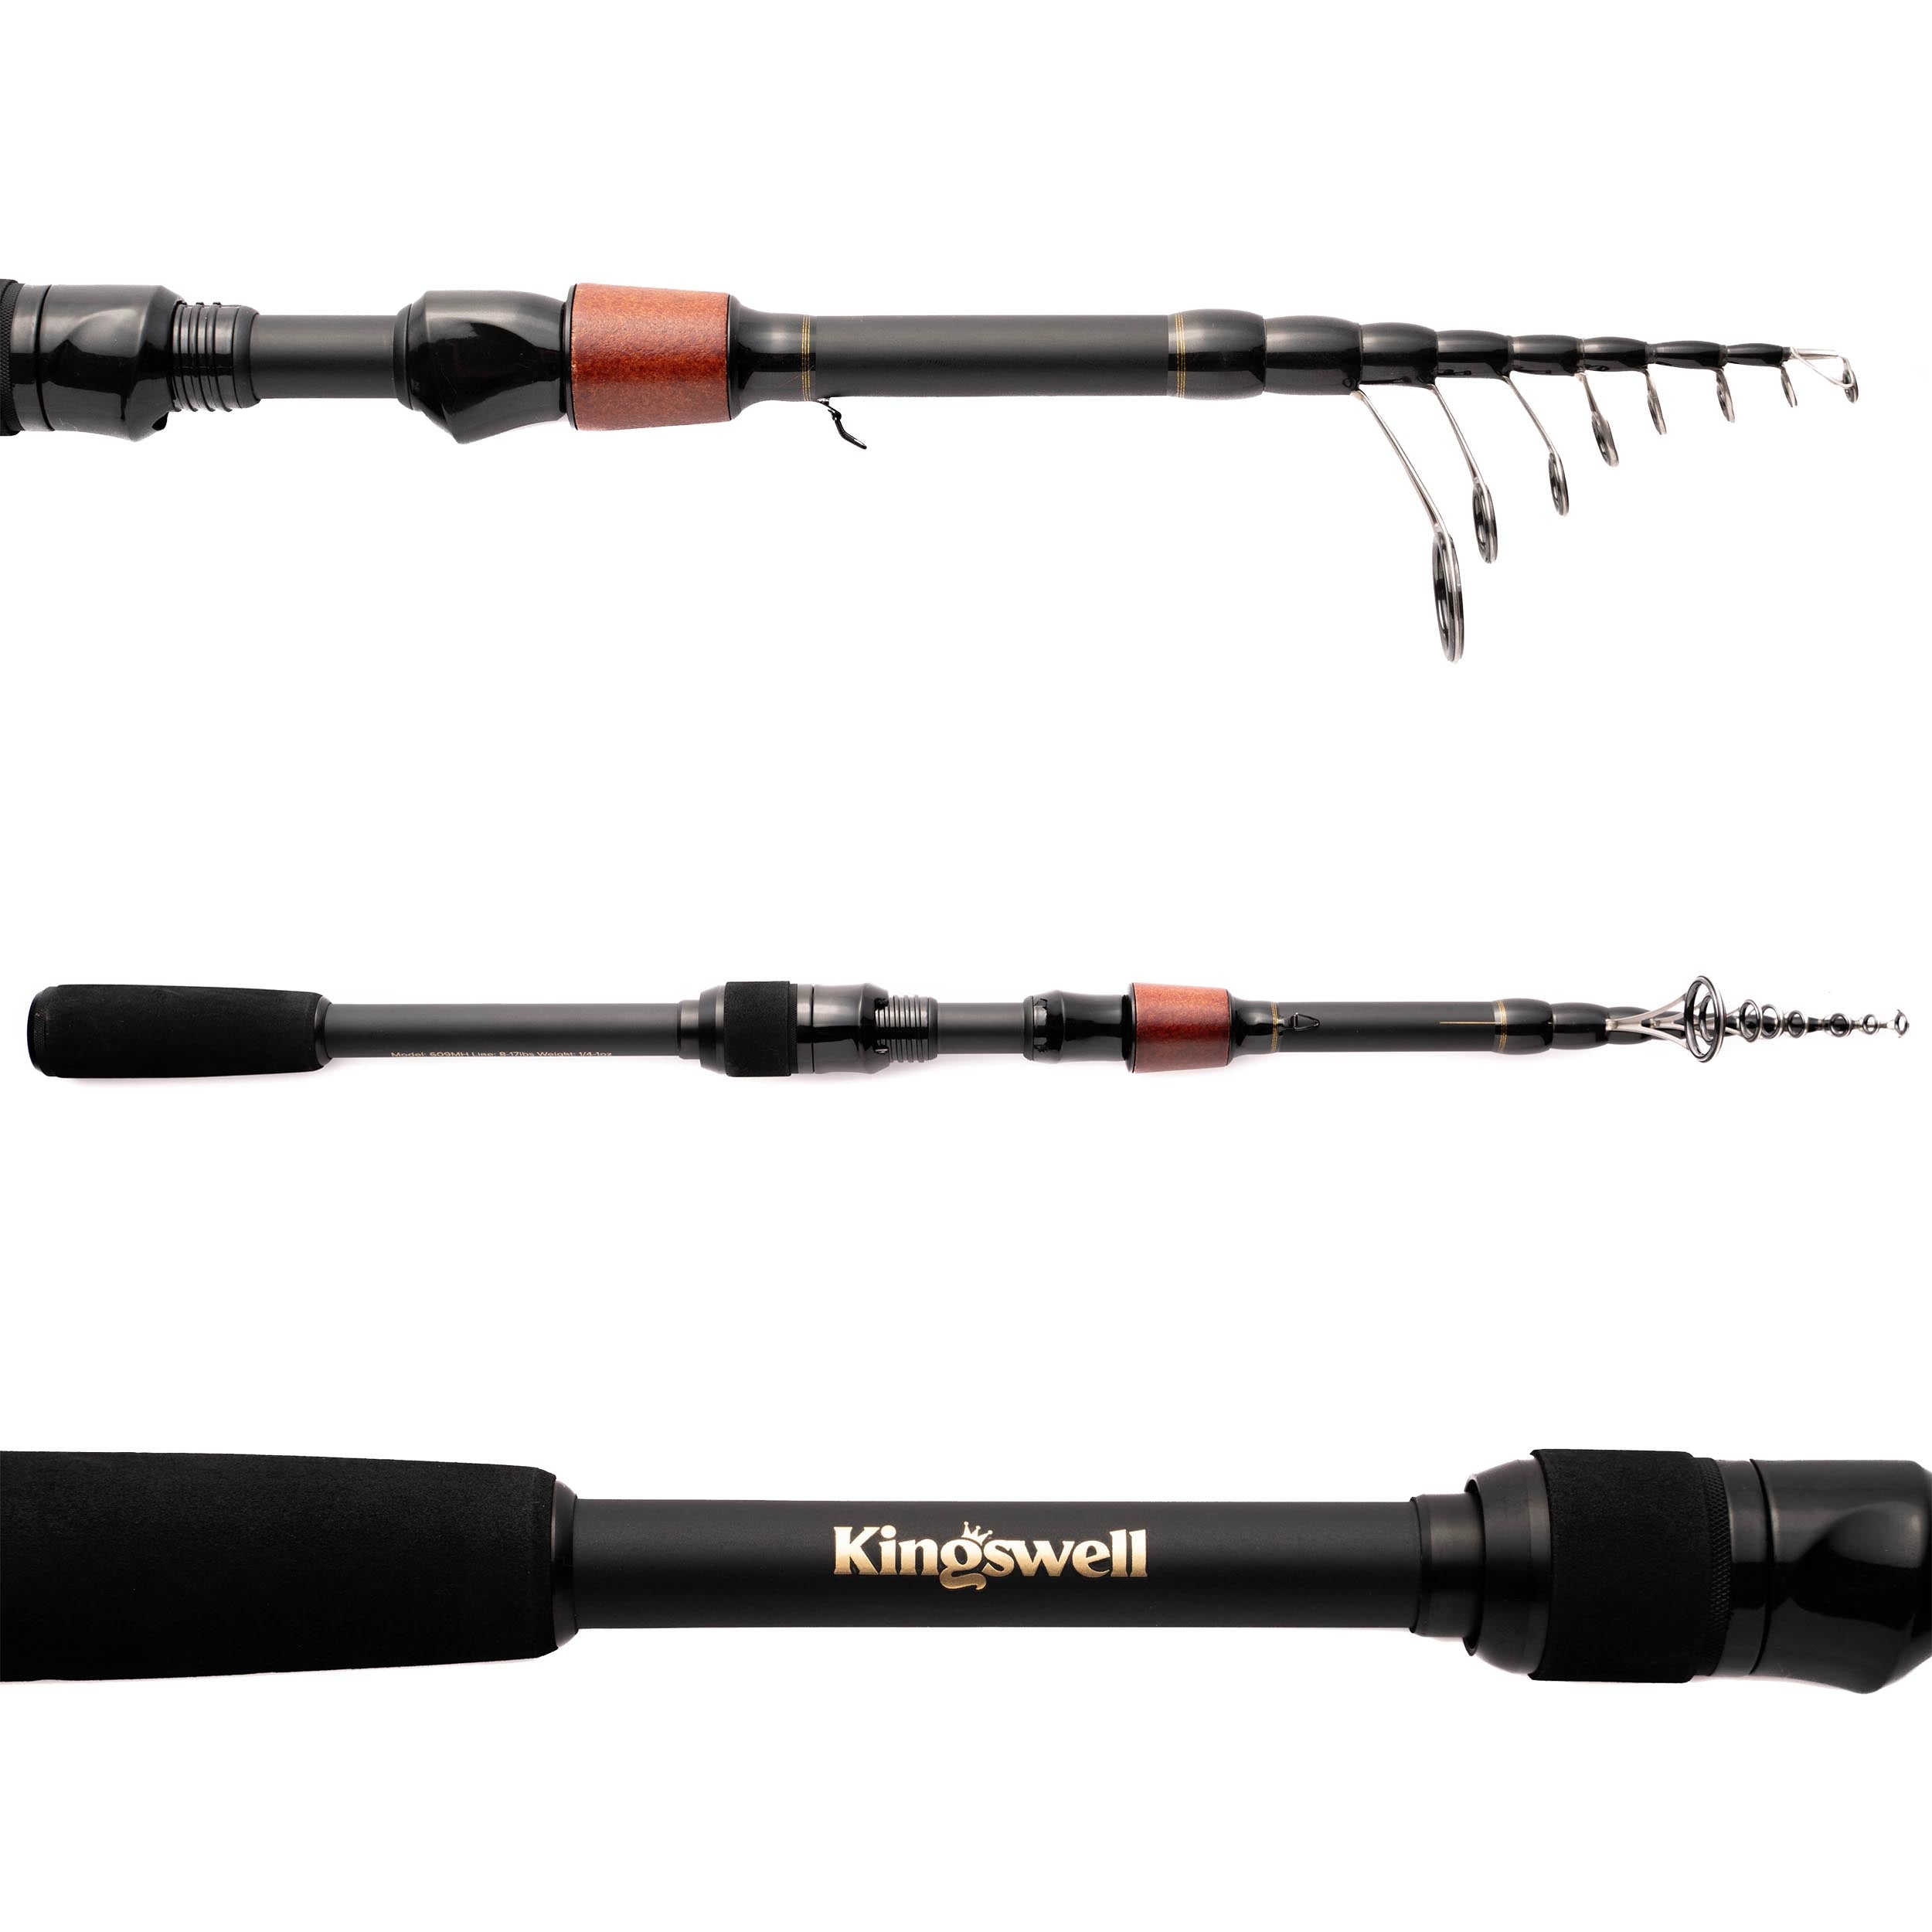 KINGSWELL TRAVEL ROD, TELESCOPING ROD AND REEL - First Cast